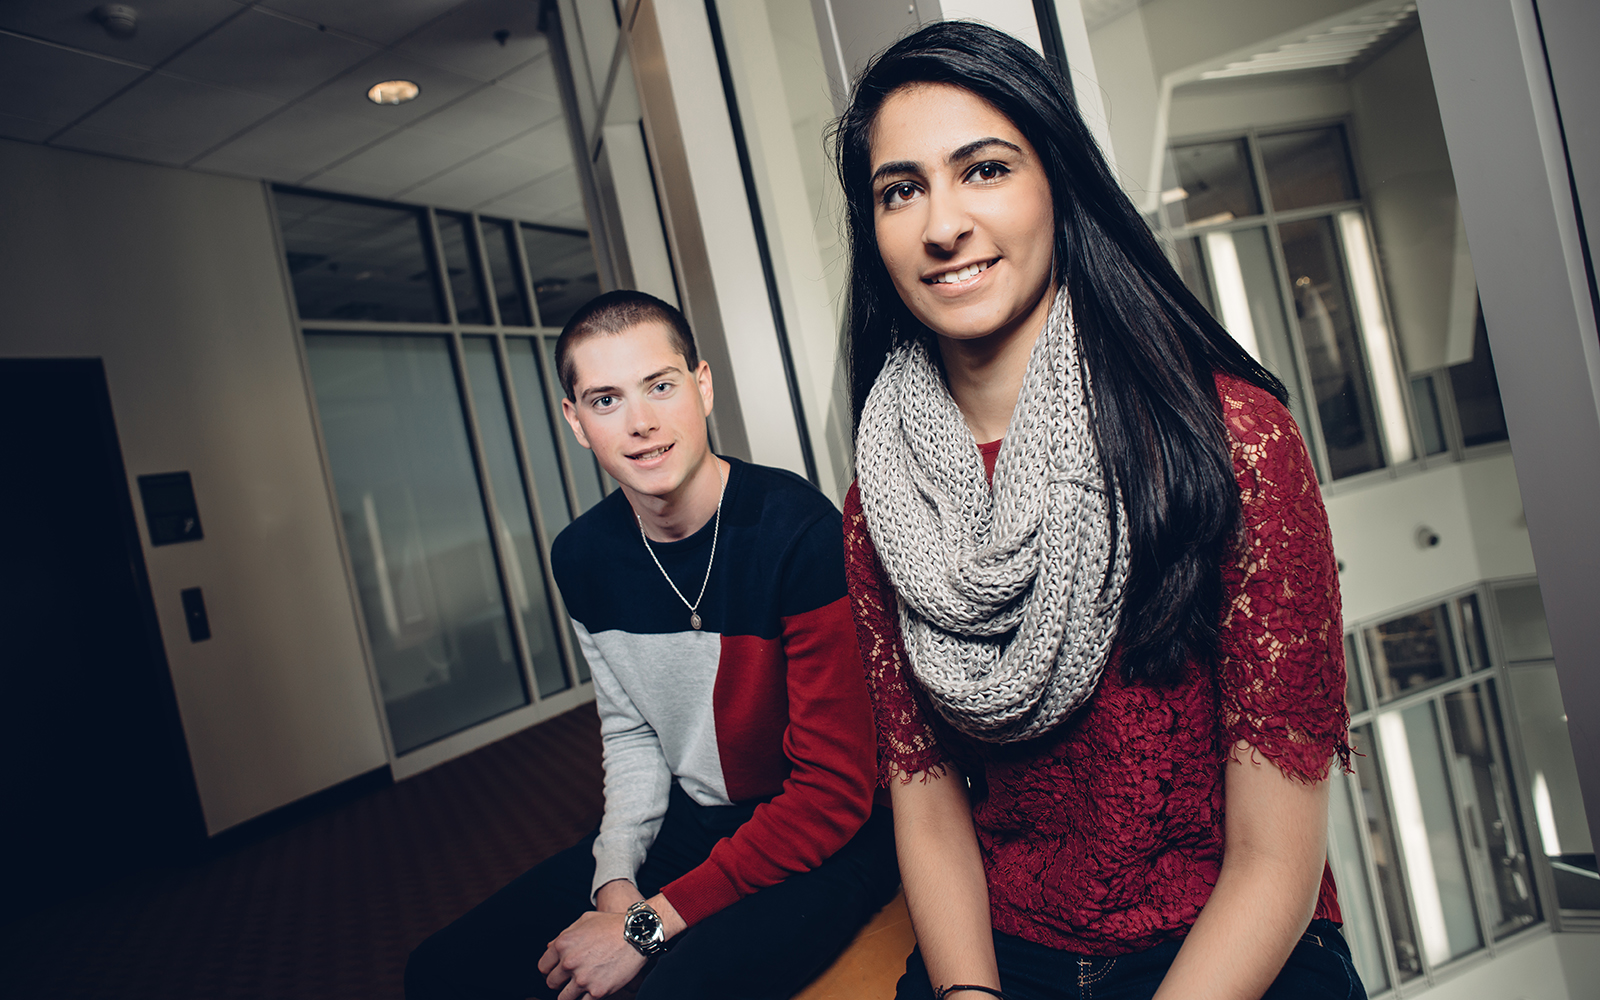 Jeffrey Noonan, left, and Kavisha Thakkar have been selected as two of UConn’s Leadership Legacy scholars, an honor bestowed on the University’s most exceptional students, who have demonstrated leadership, personal accomplishment and academic excellence. (Nathan Oldham/UConn School of Business)